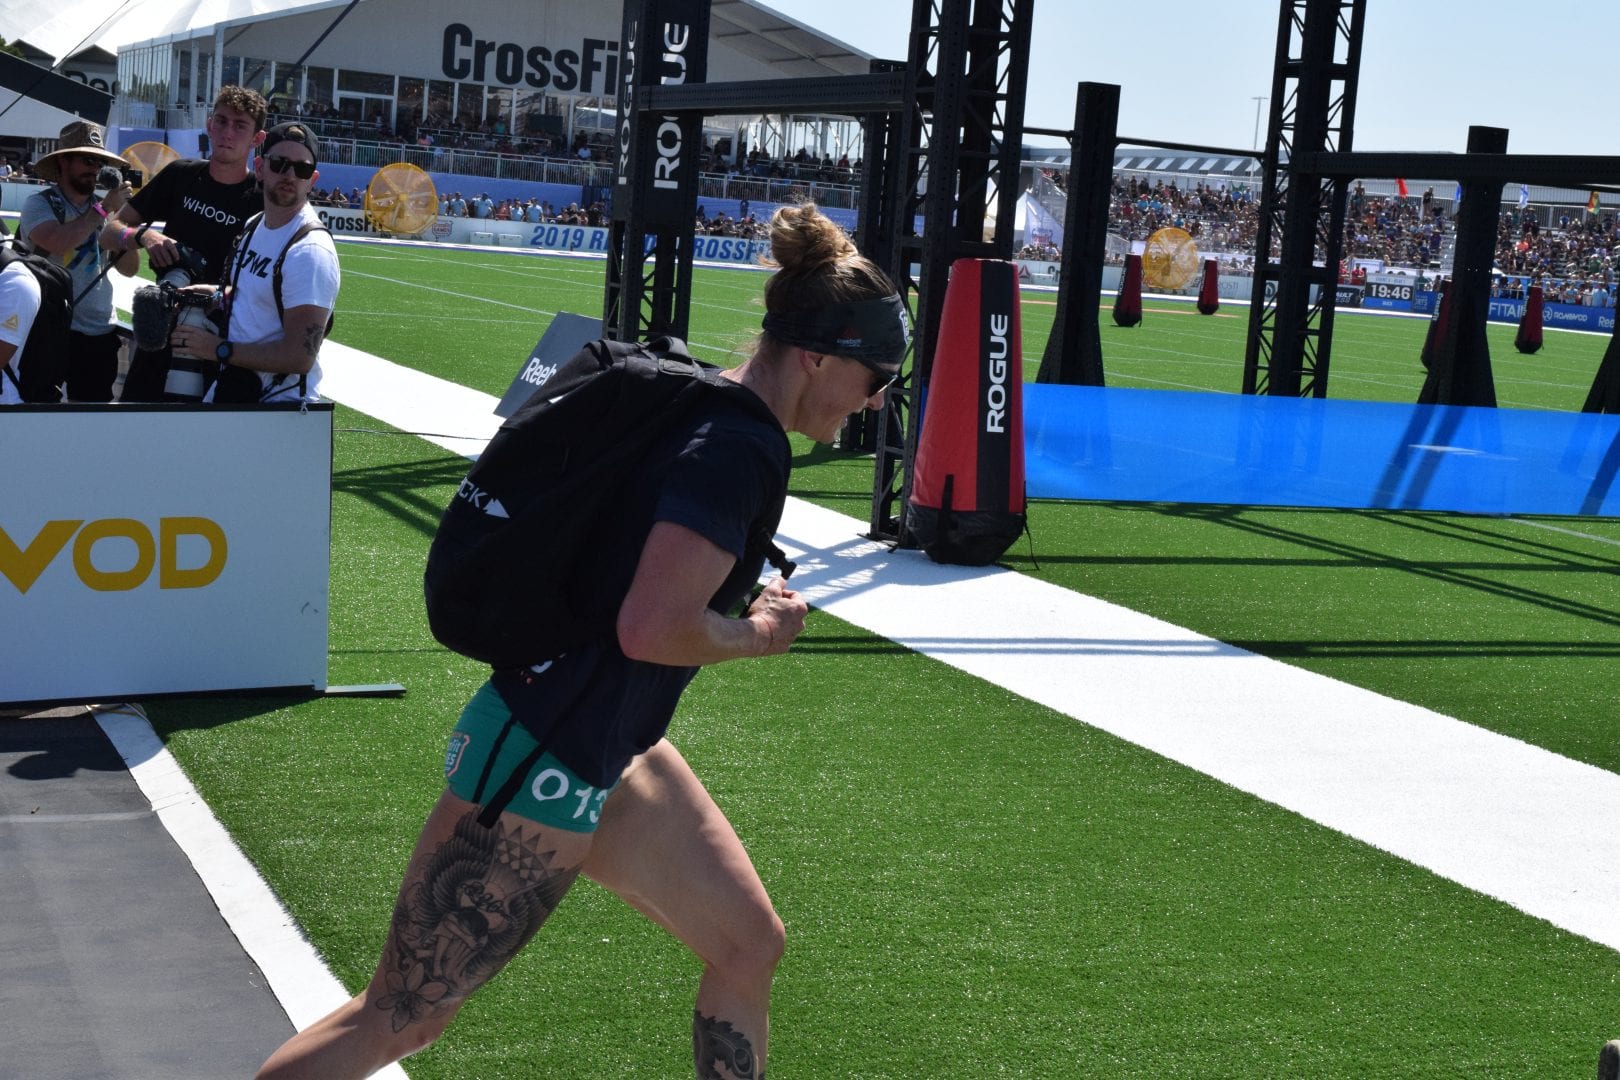 013 - Samantha Briggs of the United Kingdom completes the Ruck Run event at the 2019 CrossFit Games